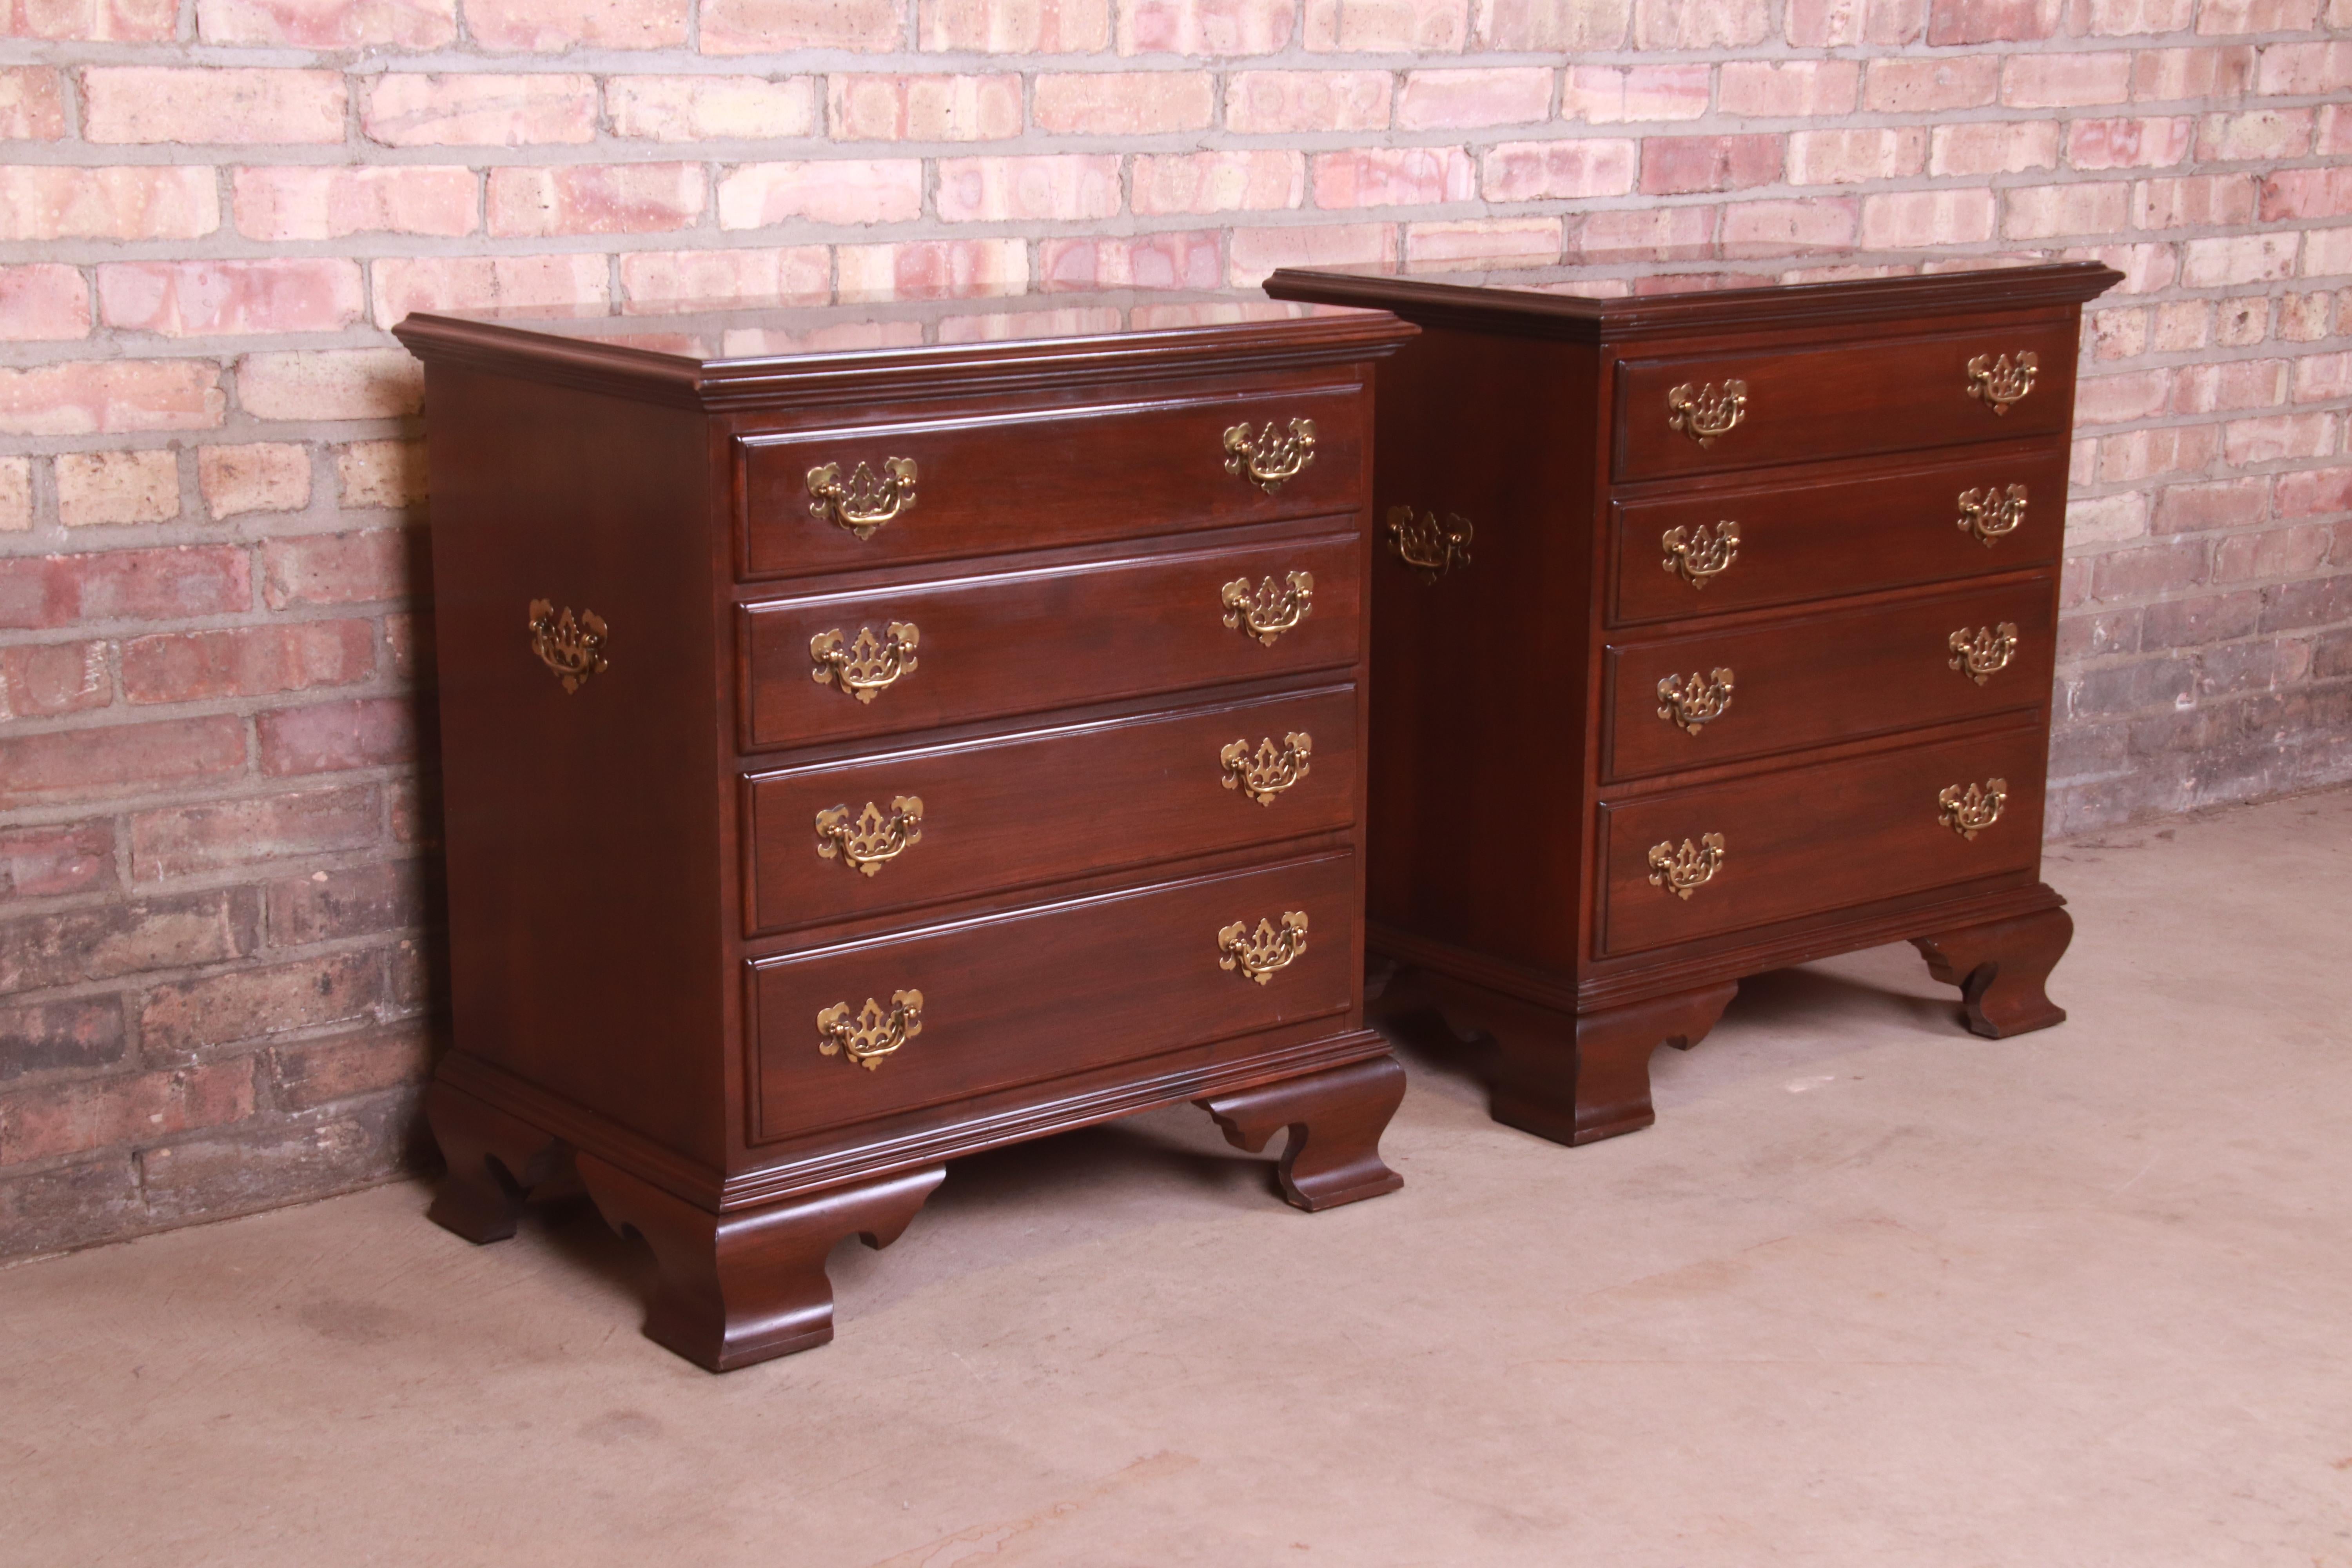 Ethan Allen Georgian Mahogany Four-Drawer Bedside Chests, Pair 2